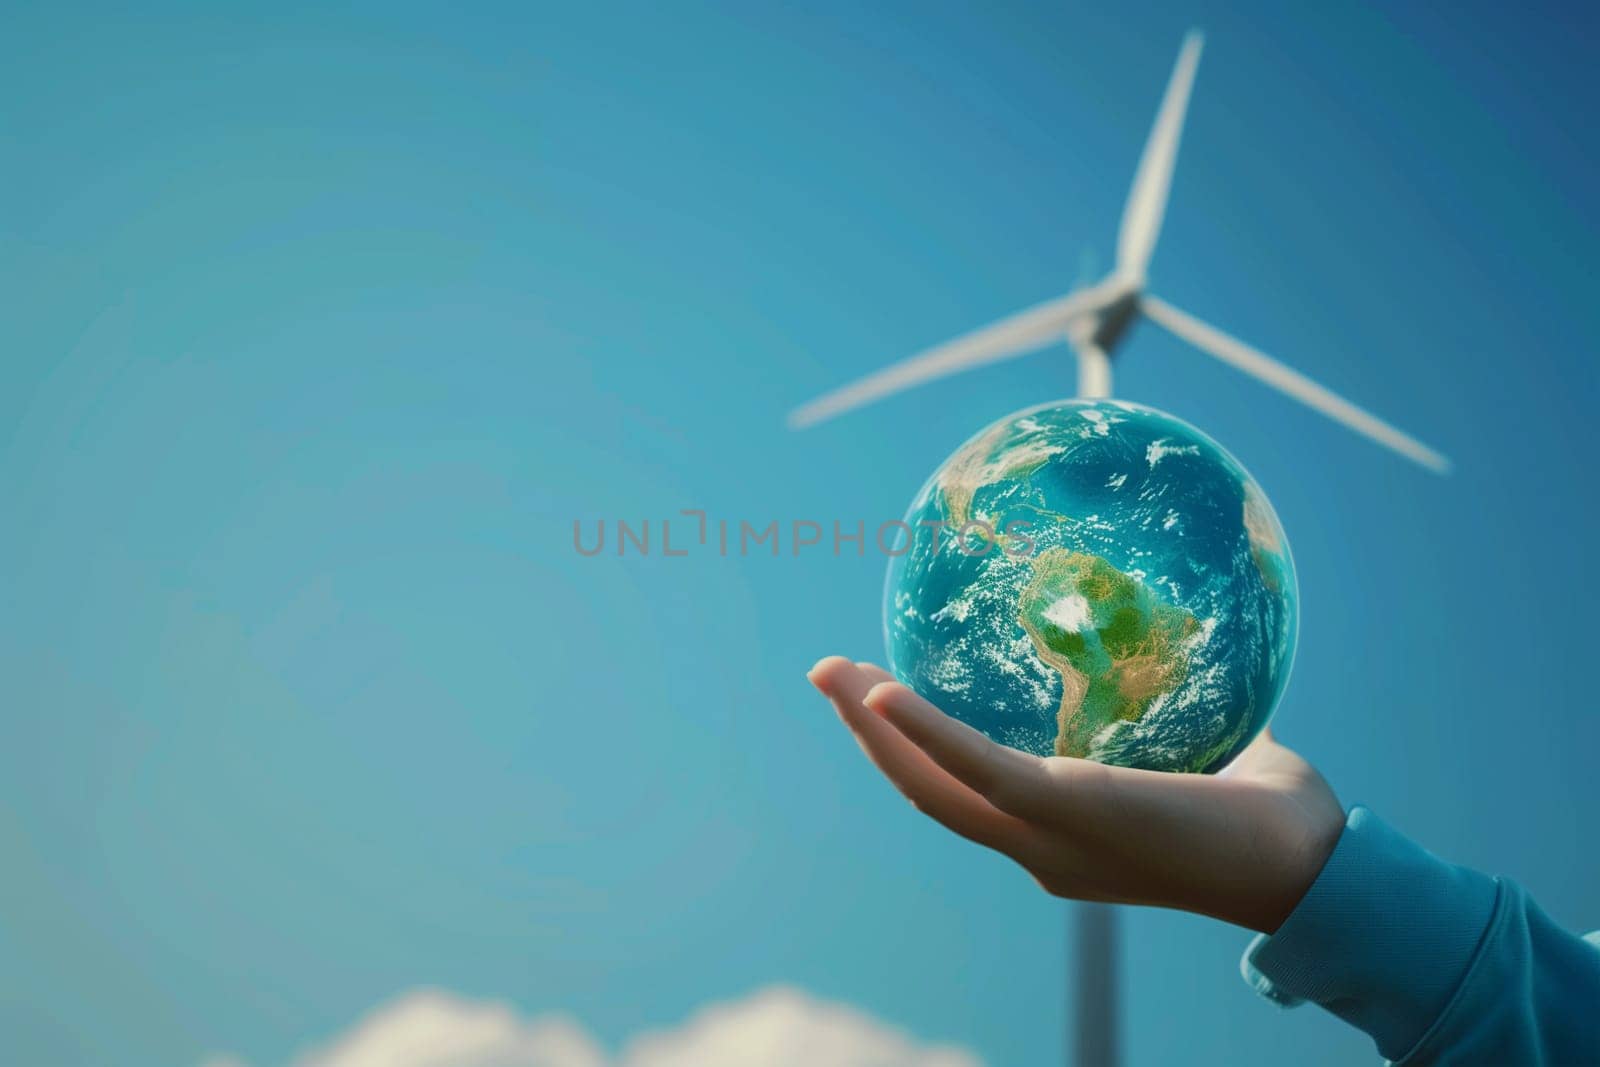 A hand holds a small earth in front of a towering wind turbine.